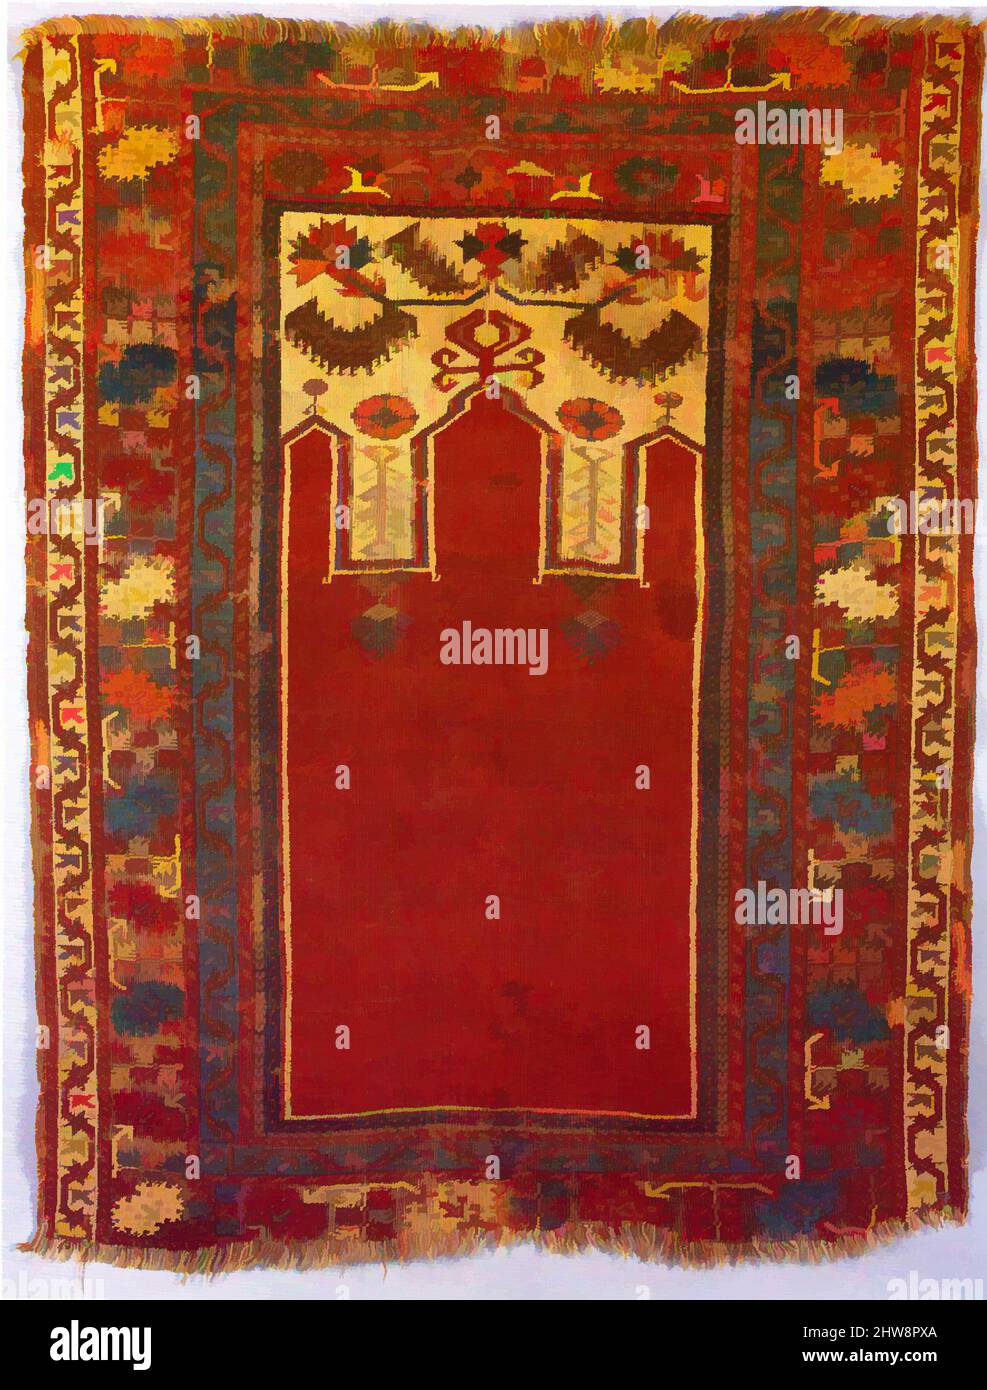 Art inspired by Prayer Rug with Triple Arch Design, probably late 18th century, Country of Origin Turkey, Central Anatolia, Konya, Wool (warp, weft, and pile); symmetrically knotted pile, L. 56 in. x W. 43 in., Textiles-Rugs, Prayer rugs or 'seccade' carpets were among the most popular, Classic works modernized by Artotop with a splash of modernity. Shapes, color and value, eye-catching visual impact on art. Emotions through freedom of artworks in a contemporary way. A timeless message pursuing a wildly creative new direction. Artists turning to the digital medium and creating the Artotop NFT Stock Photo